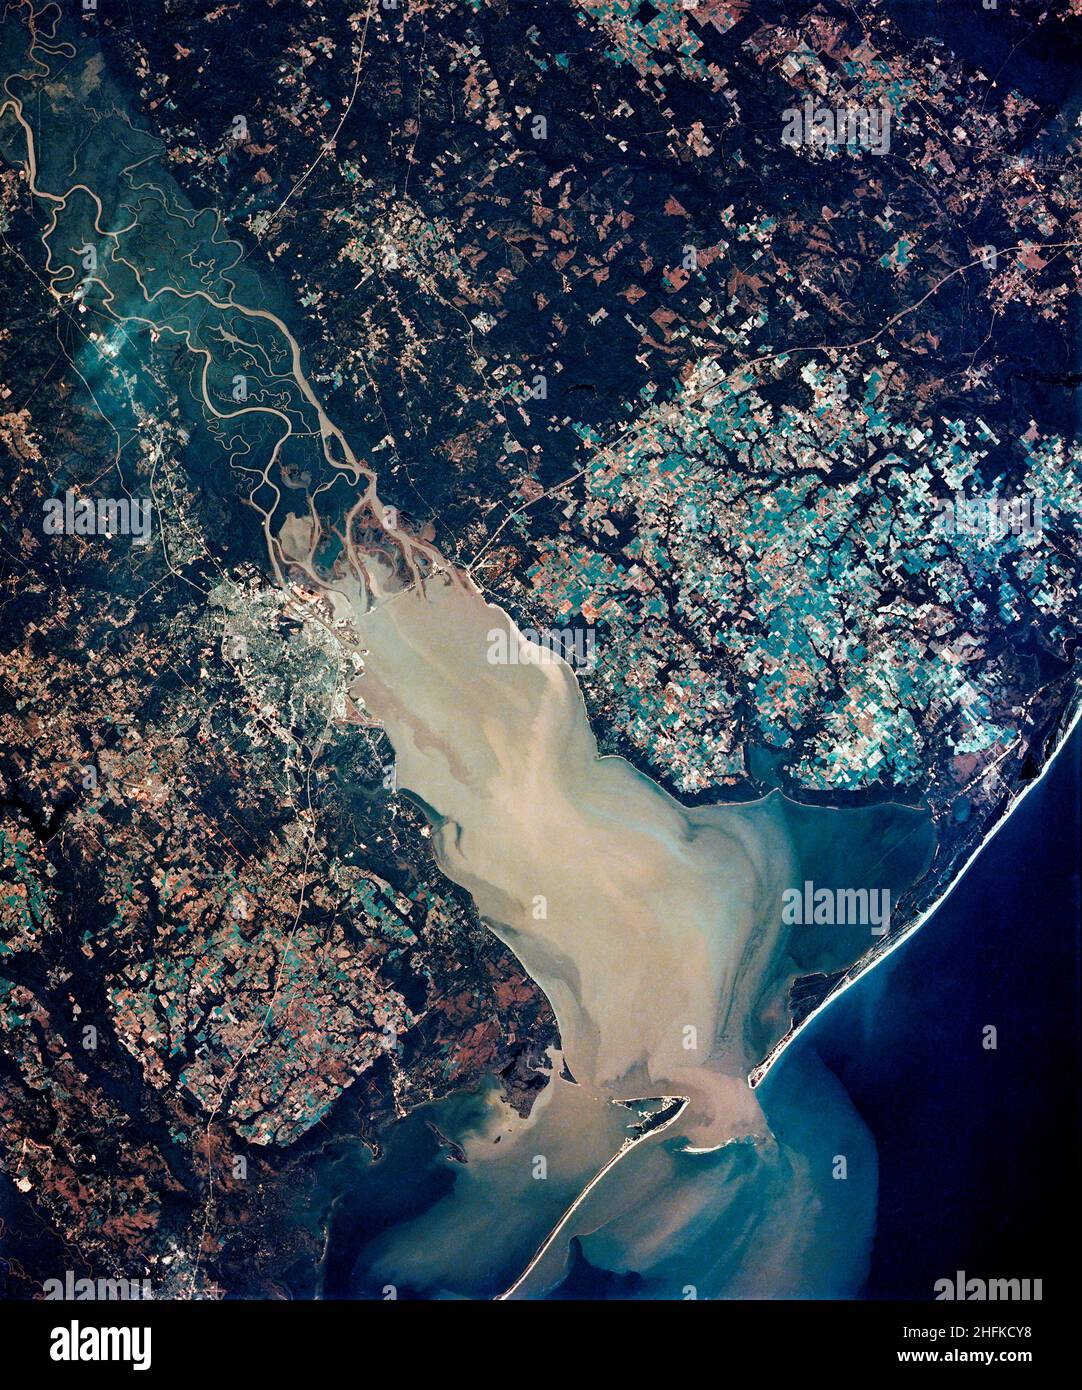 (February 1974) --- A near vertical view of the Mobile Bay, Alabama area is seen in this Skylab 4 Earth Resources Experiments Package S190-B (five-inch earth terrain camera) photograph taken from the Skylab space station in Earth orbit. North of Mobile the Tombigbee and Alabama Rivers join to form the Mobile River. Detailed configuration of the individual stream channels and boundaries can be defined as the Mobile River flows into Mobile Bay, and thence into the Gulf of Mexico. The Mobile River Valley with its numerous stream channels is a distinct light shade in contrast to the dark green sha Stock Photo